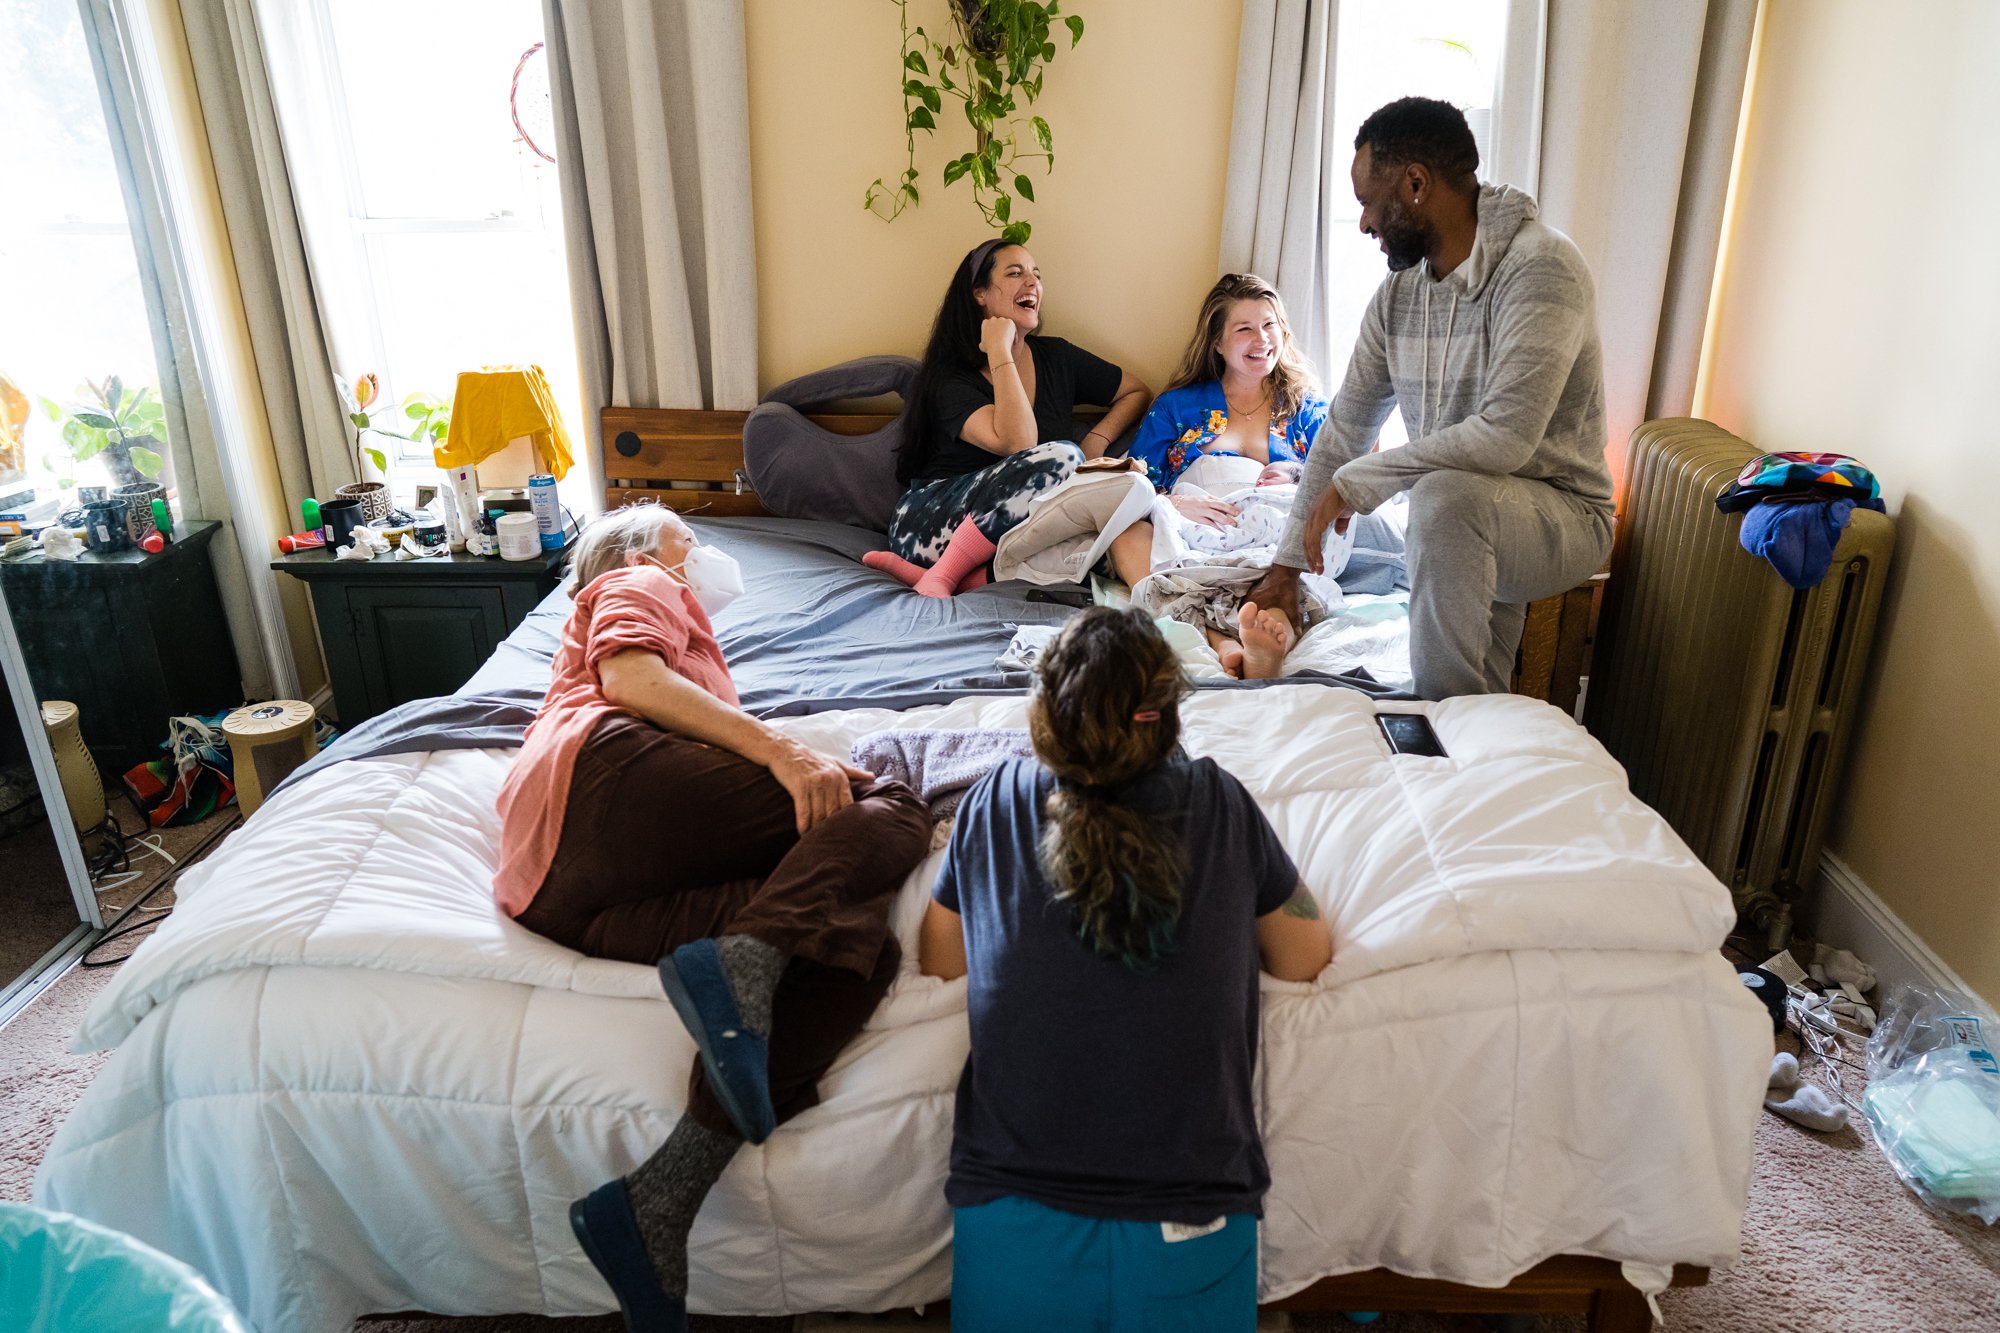 Home birth team relaxes on bed together, midwives, doula, father, laugh at story mom is telling, Philadelphia photographer